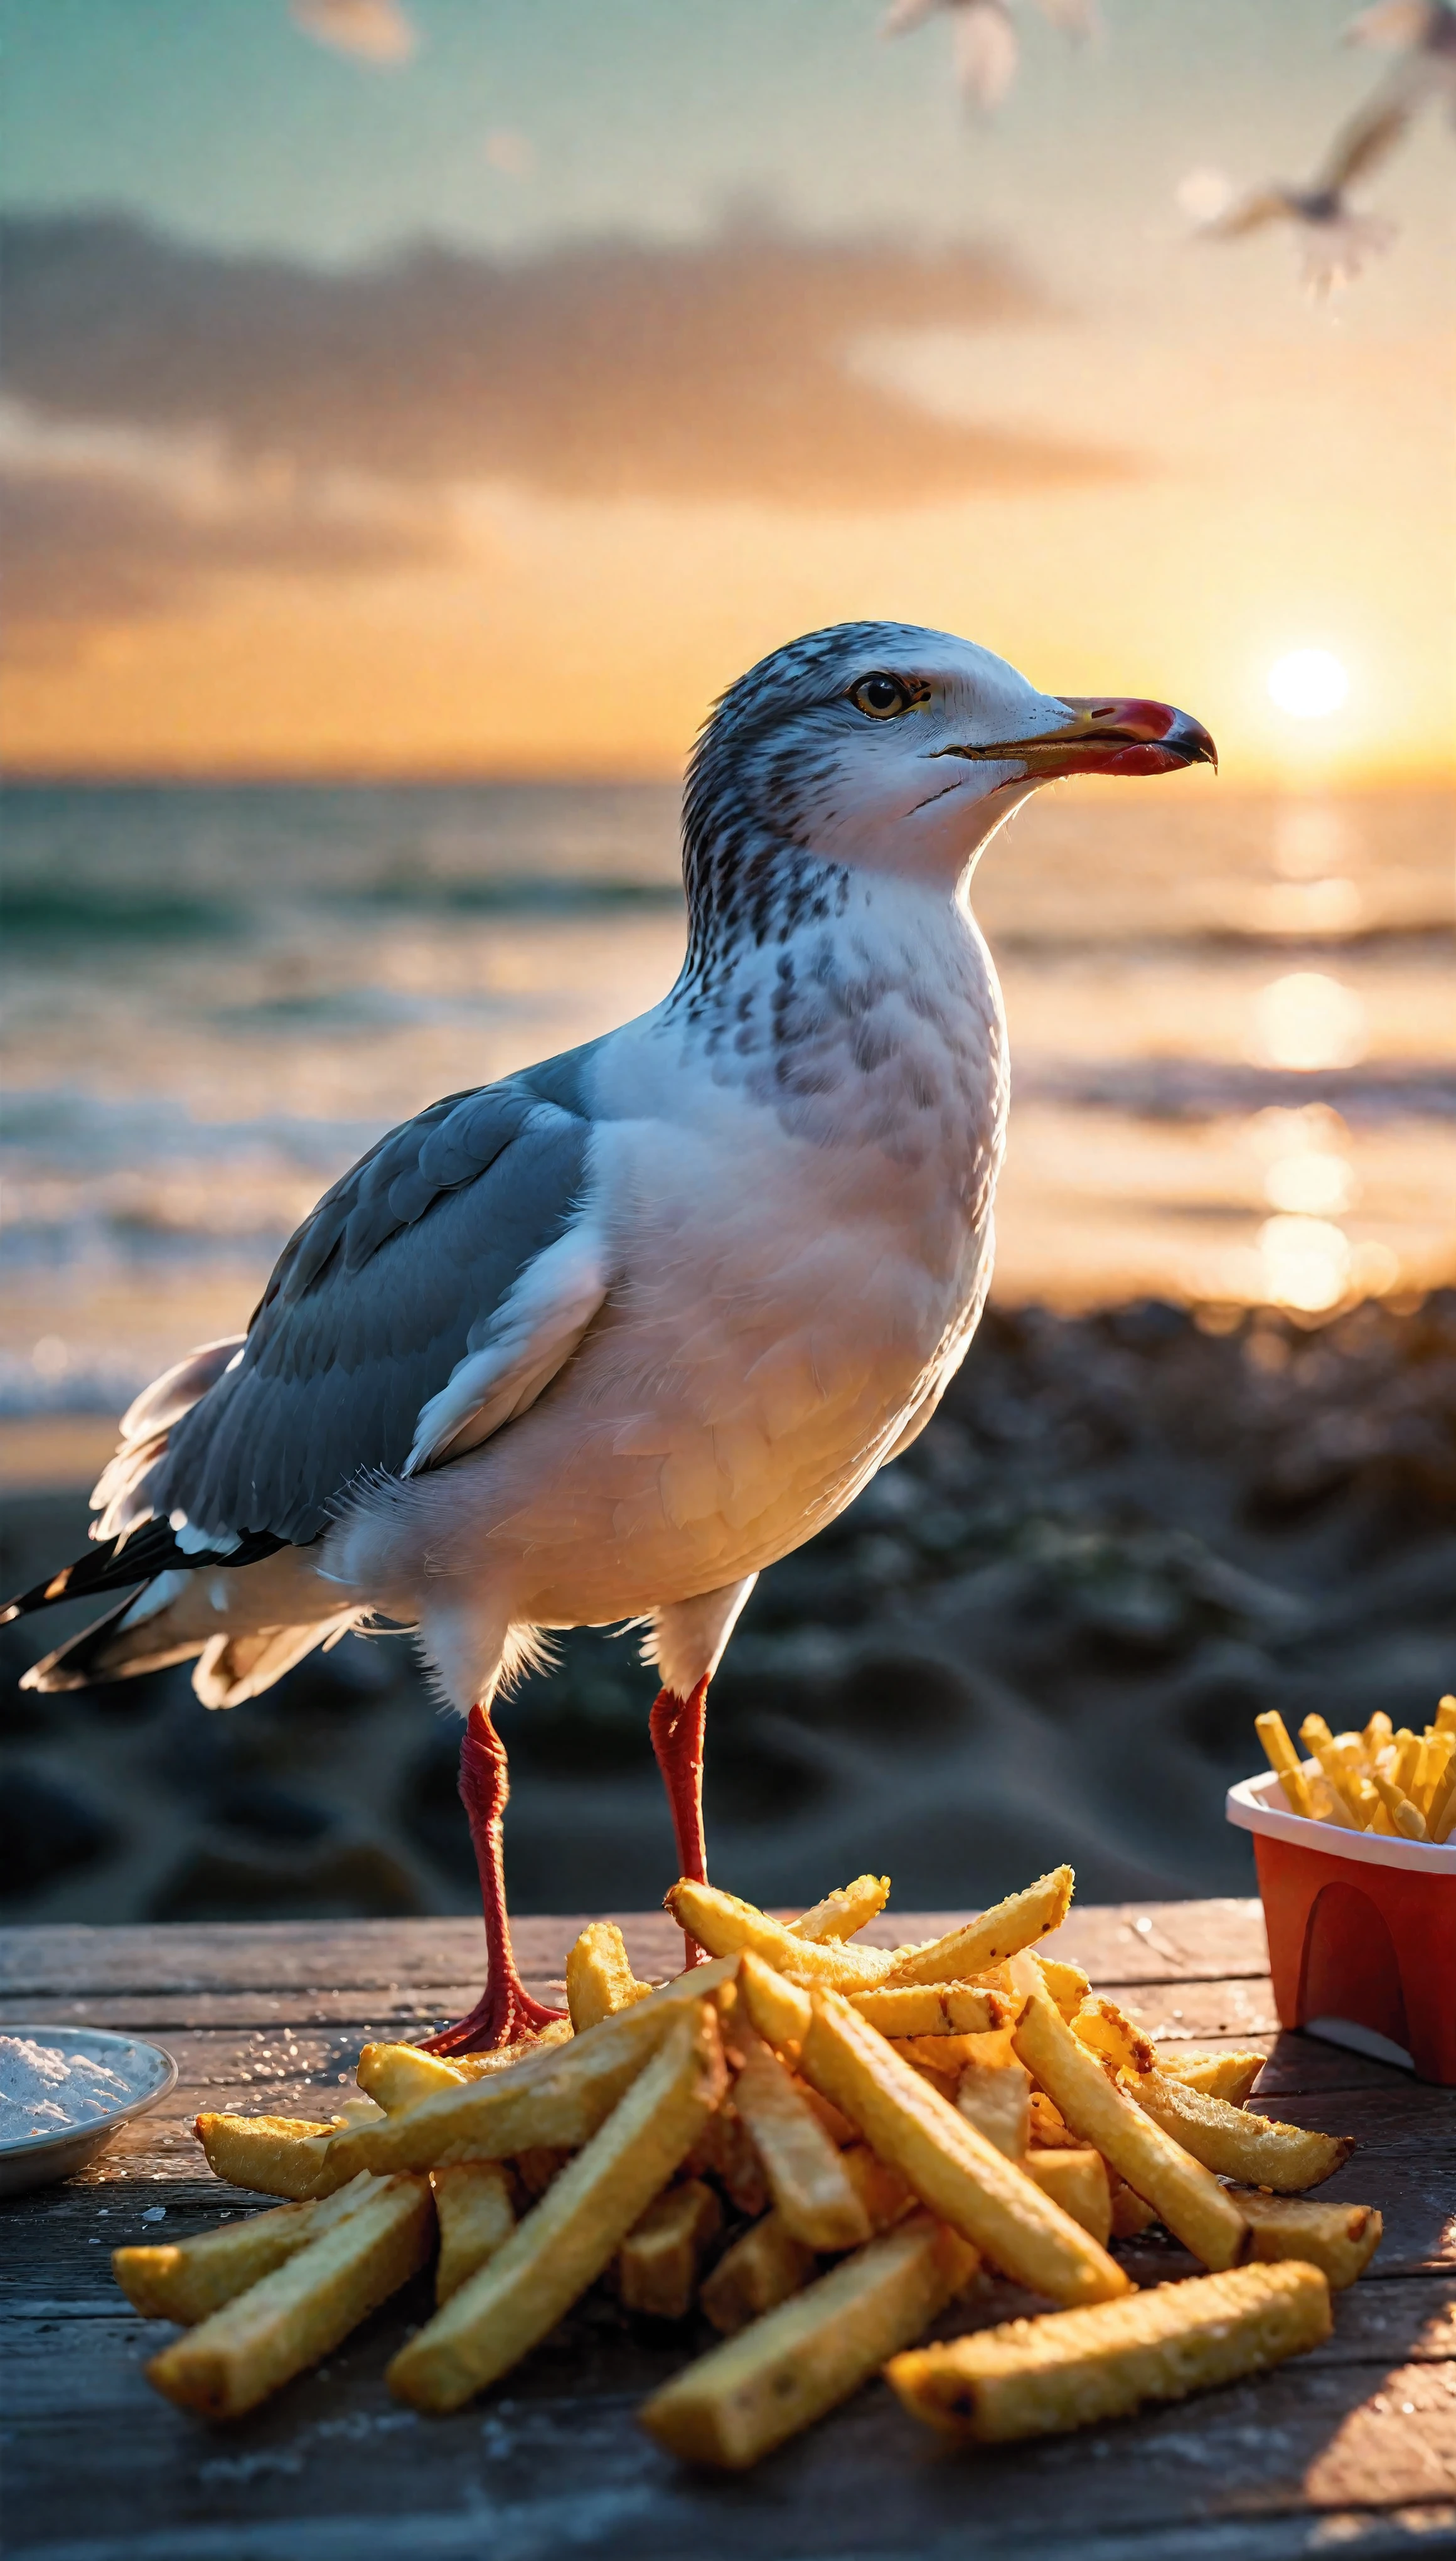 ((Masterpiece in maximum 16K resolution):1.6),((soft_color_photograpy:)1.5), ((Ultra-Detailed):1.4),((Movie-like still images and dynamic angles):1.3). | (Macro shot cinematic photo of seagull flying over a beach table with french fries.), ((detailed seagull, detailed french fries, beach, detailed wooden table, sunset, golden hour lighting, vibrant colors):1.2), (macro lens), (exotic animal), (cute), (delightful atmosphere), (aesthetic photography style), (visual experience),(Realism), (Realistic),award-winning graphics, dark shot, film grain, extremely detailed, Digital Art, rtx, Unreal Engine, scene concept anti glare effect, All captured with sharp focus. | Rendered in ultra-high definition with UHD and retina quality, this masterpiece ensures anatomical correctness and textured skin with super detail. With a focus on high quality and accuracy, this award-winning portrayal captures every nuance in stunning 16k resolution, immersing viewers in its lifelike depiction. | ((perfect_composition, perfect_design, perfect_layout, perfect_detail, ultra_detailed)), ((enhance_all, fix_everything)), More Detail, Enhance.